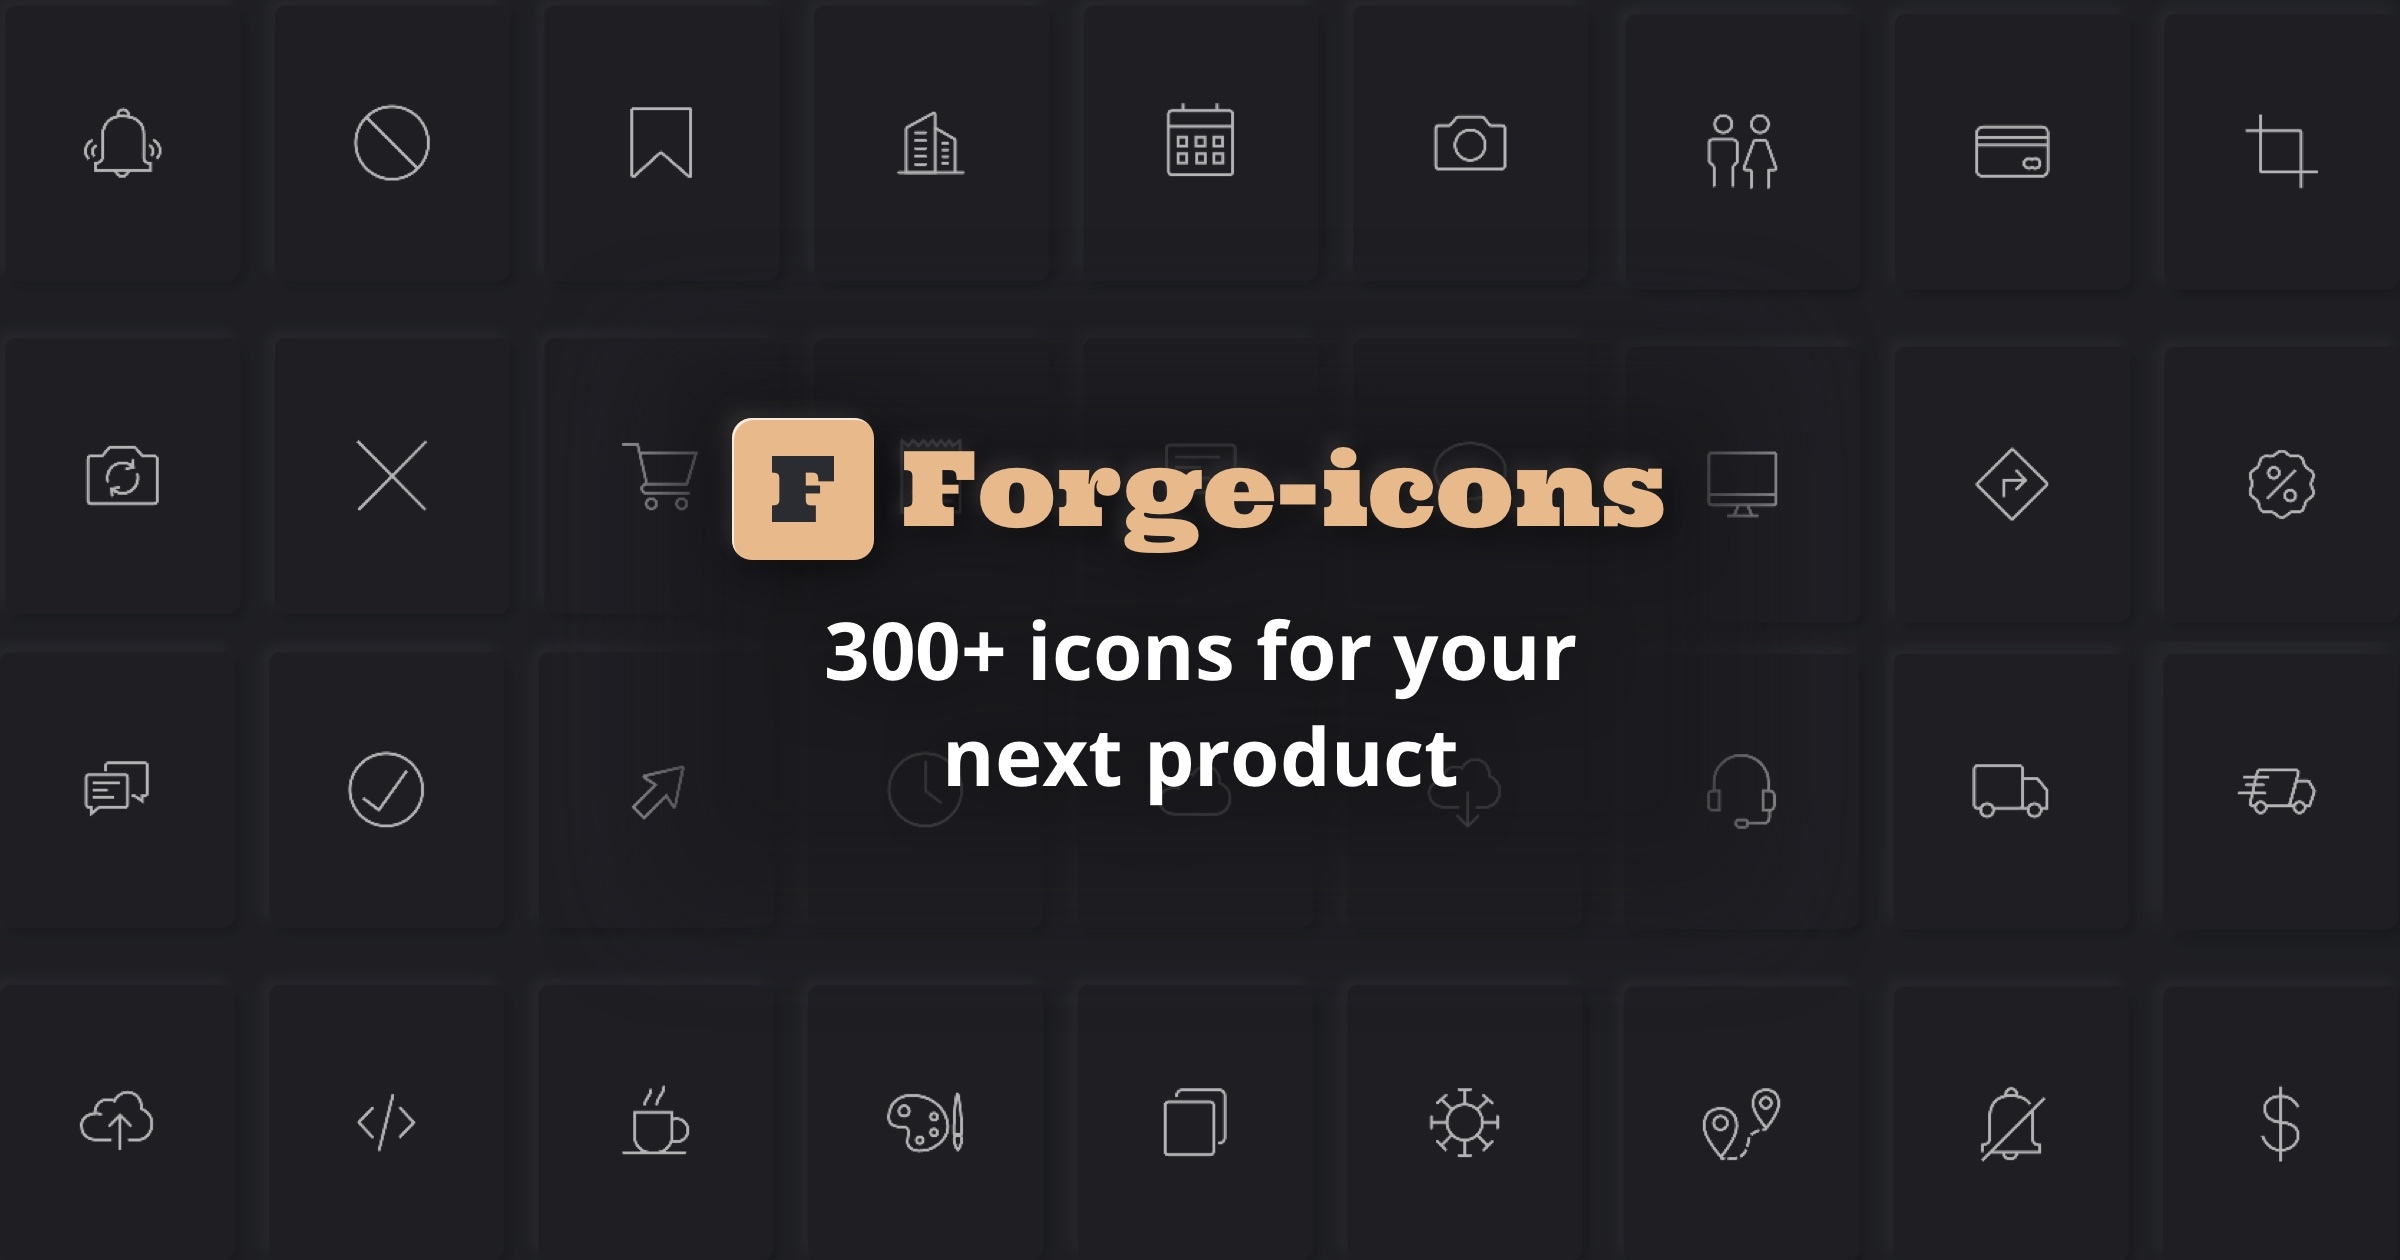 Forge Icons - 300+ right mix of SVG icons for use in e-commerce, travel, social media, app design and much more.